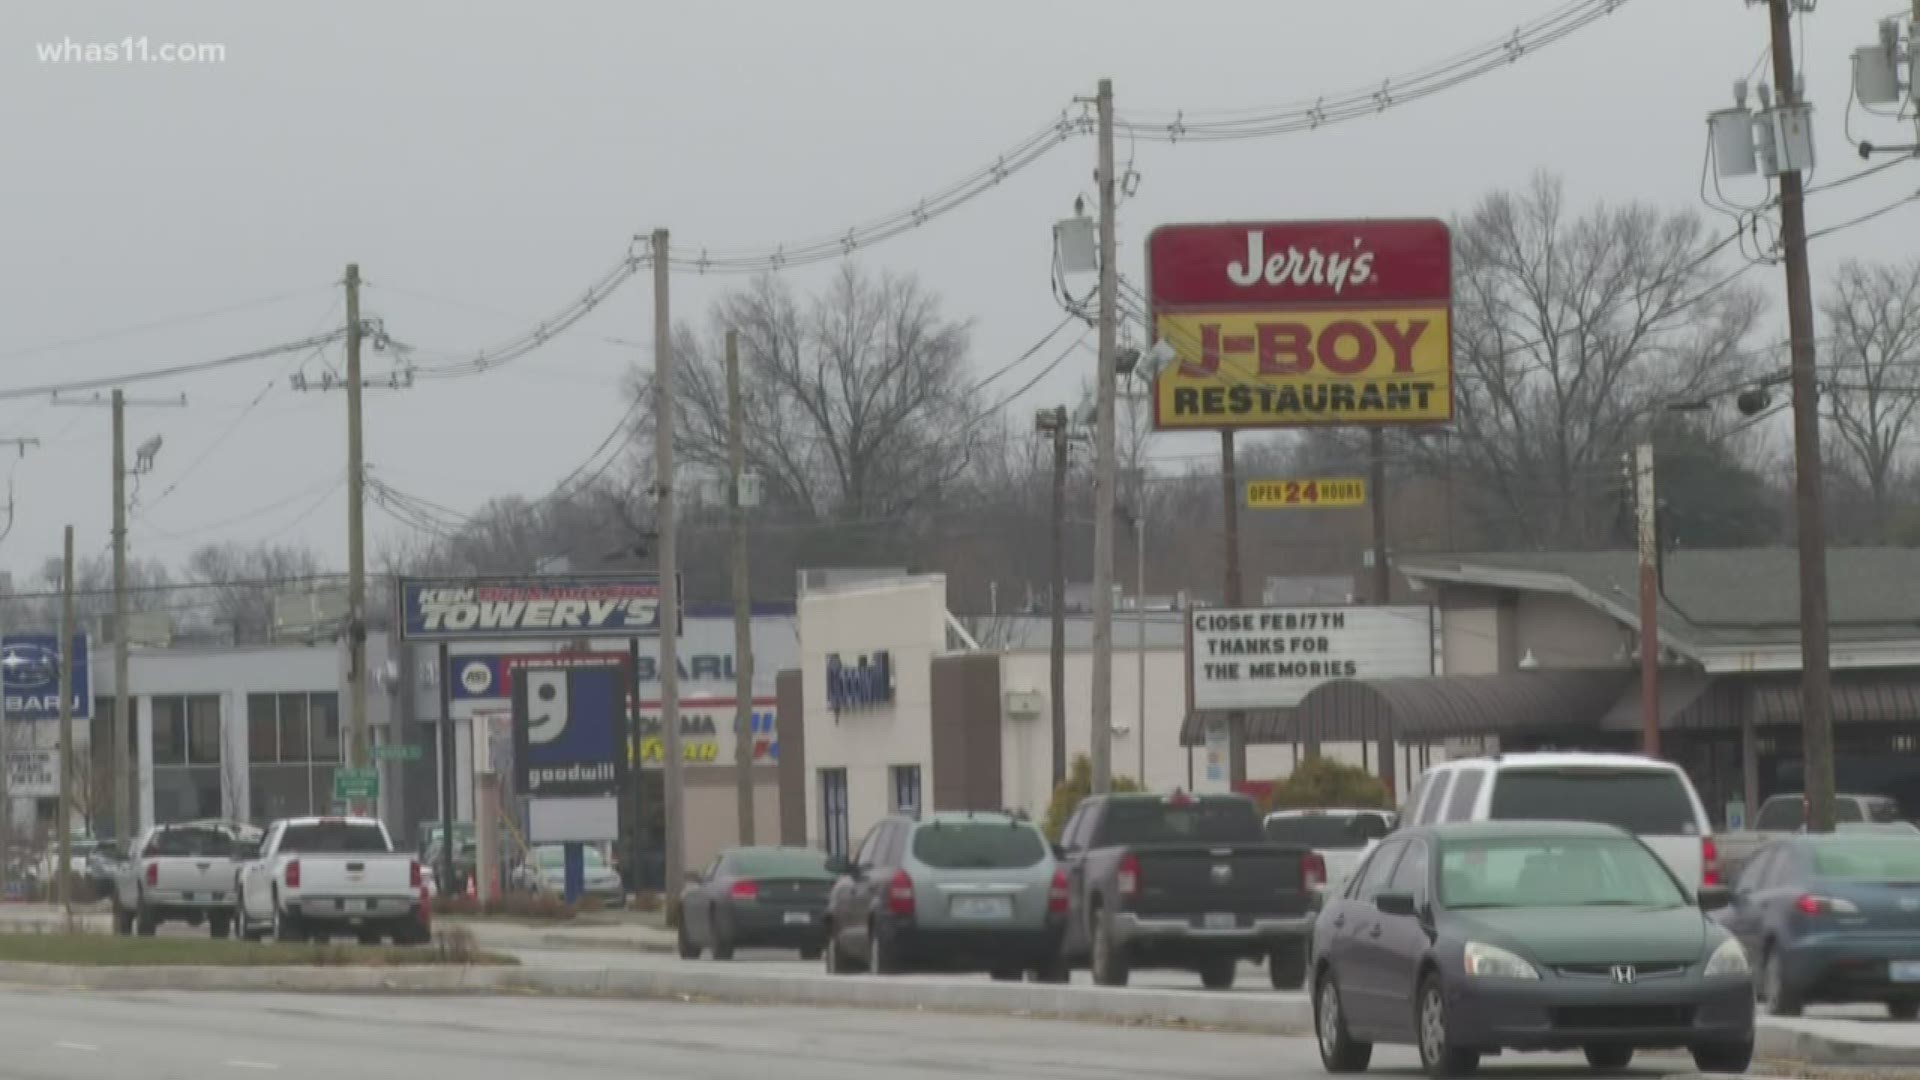 Major construction on Dixie Highway is finished. 
But getting to this point wasn't easy for businesses along the road.